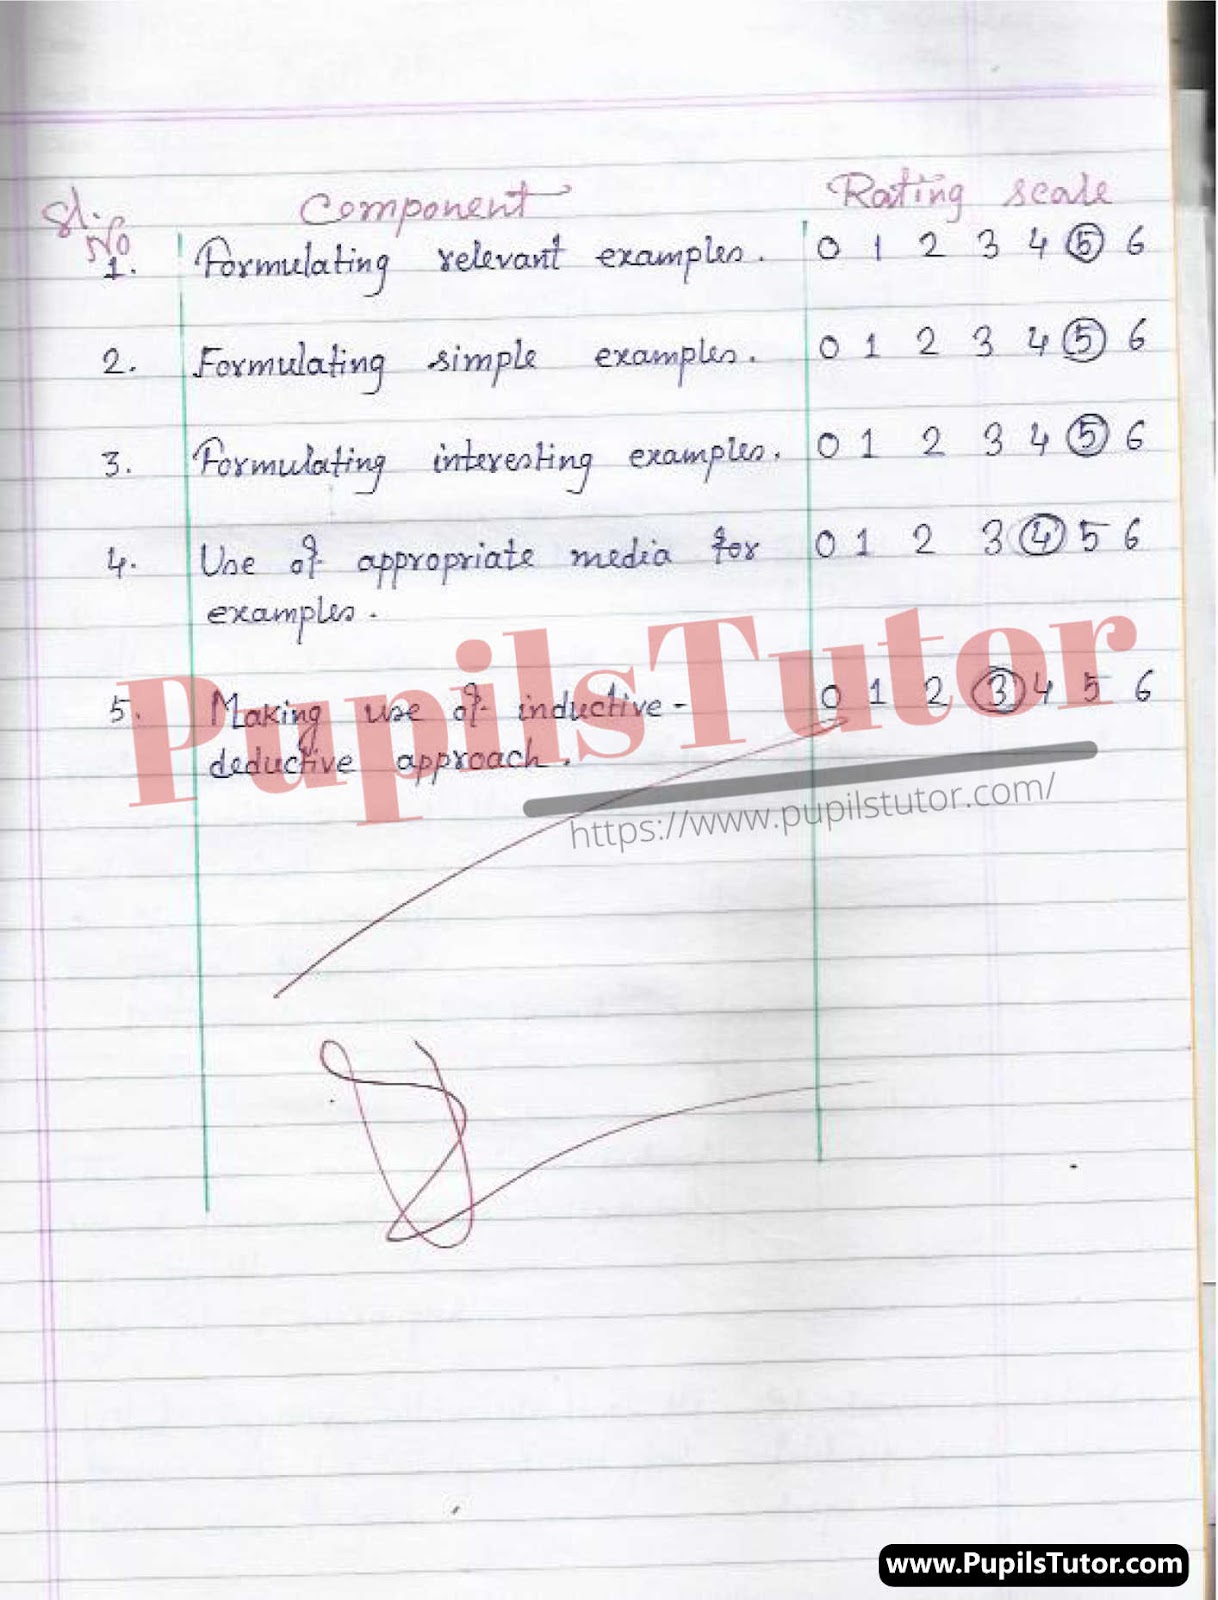 Class/Grade 8 To 12 Biological Science Microteaching Skill Of Questioning Lesson Plan On Mechanism Of Organic Evolution For CBSE NCERT KVS School And University College Teachers – (Page And Image Number 3) – www.pupilstutor.com